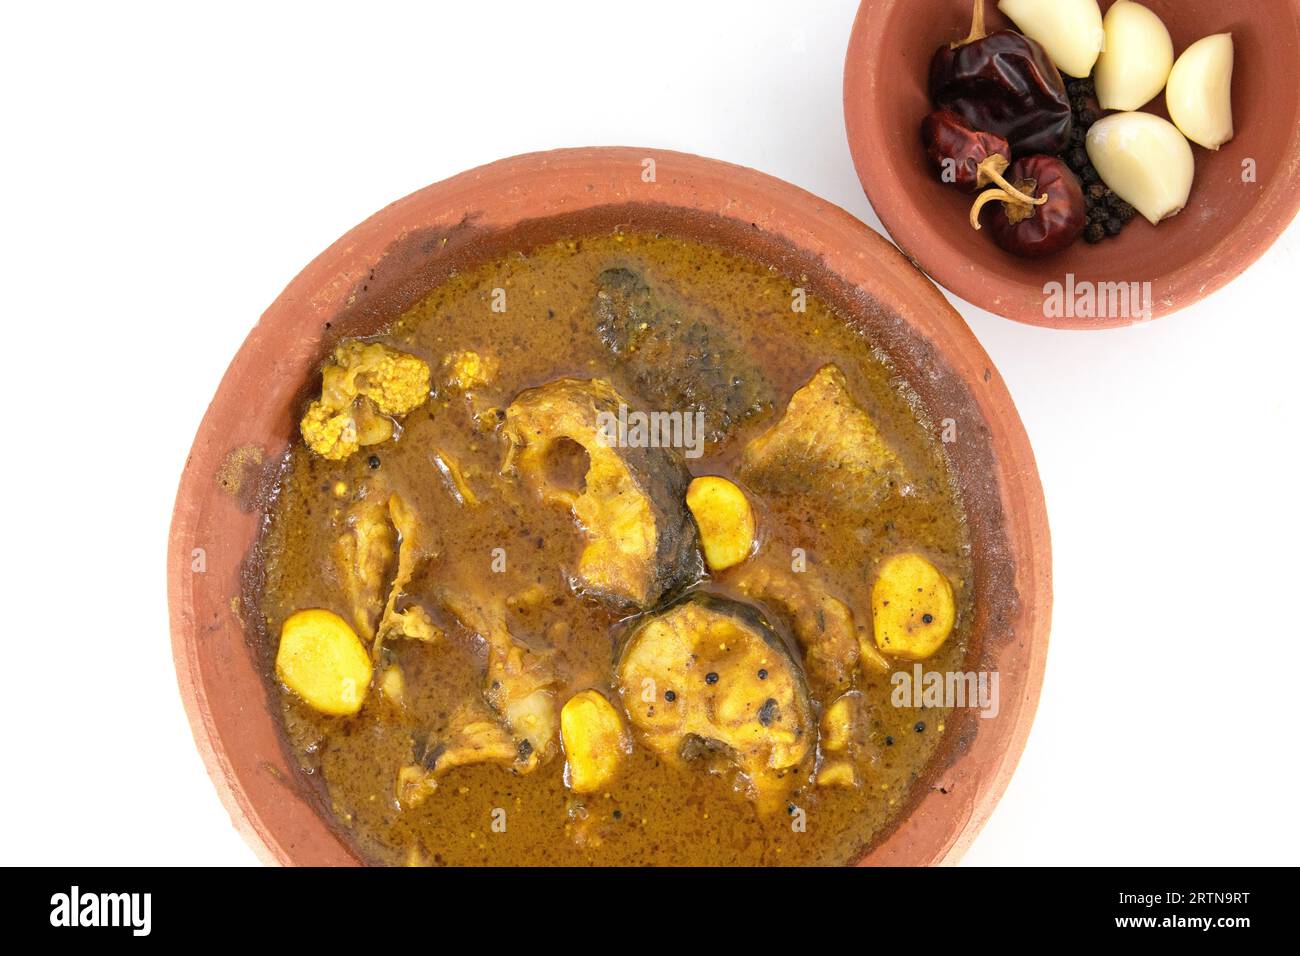 ish curry served in traditional mud pot with fish curry ingredient. Fresh fish curry with chilli, pepper and garlic. Special south Indian fish curry. Stock Photo